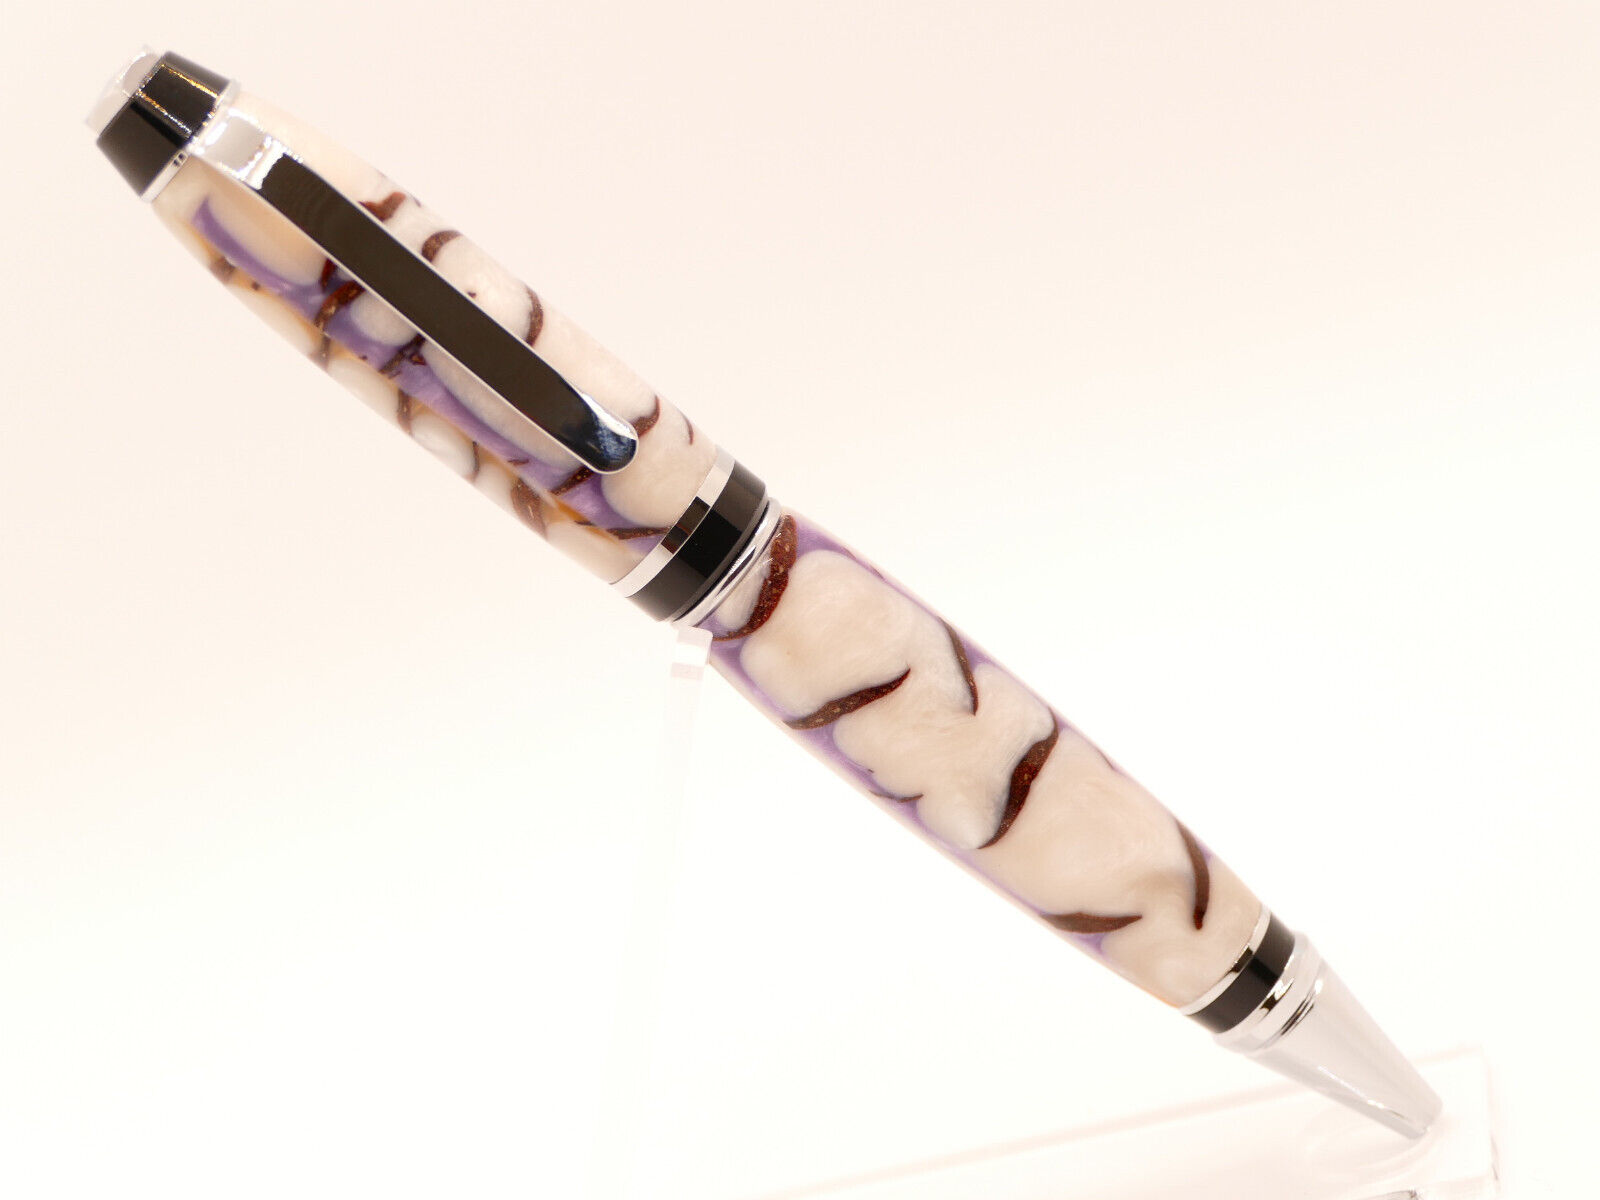 Beautiful Hand turned Handmade Cigar Style Pen Resin with embedded pine cone